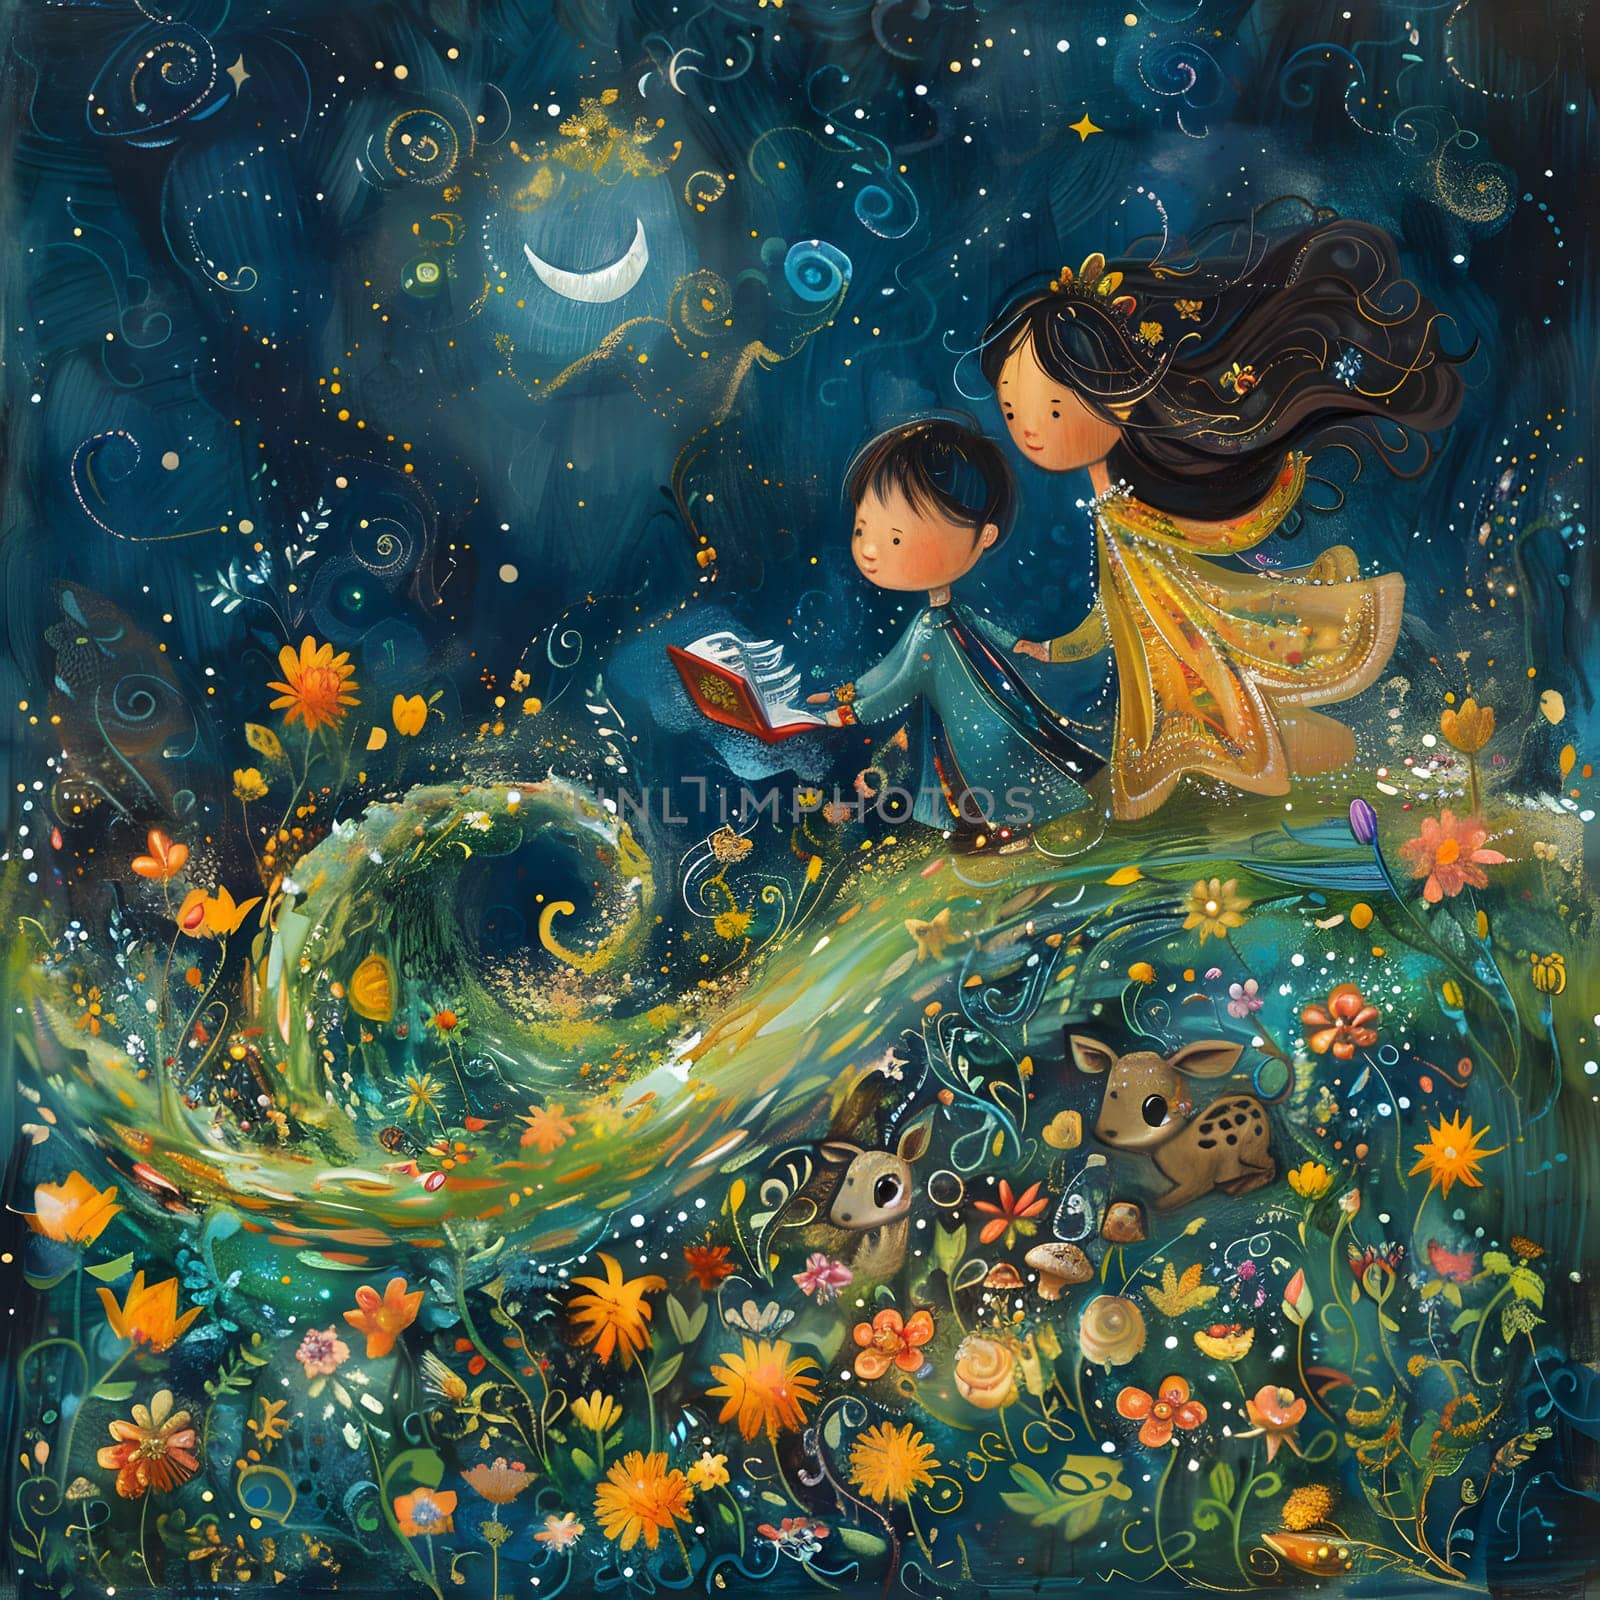 An illustration of a boy and a girl engrossed in a book, captured in a circle painting. The art portrays the beauty of reading together in a celestial space